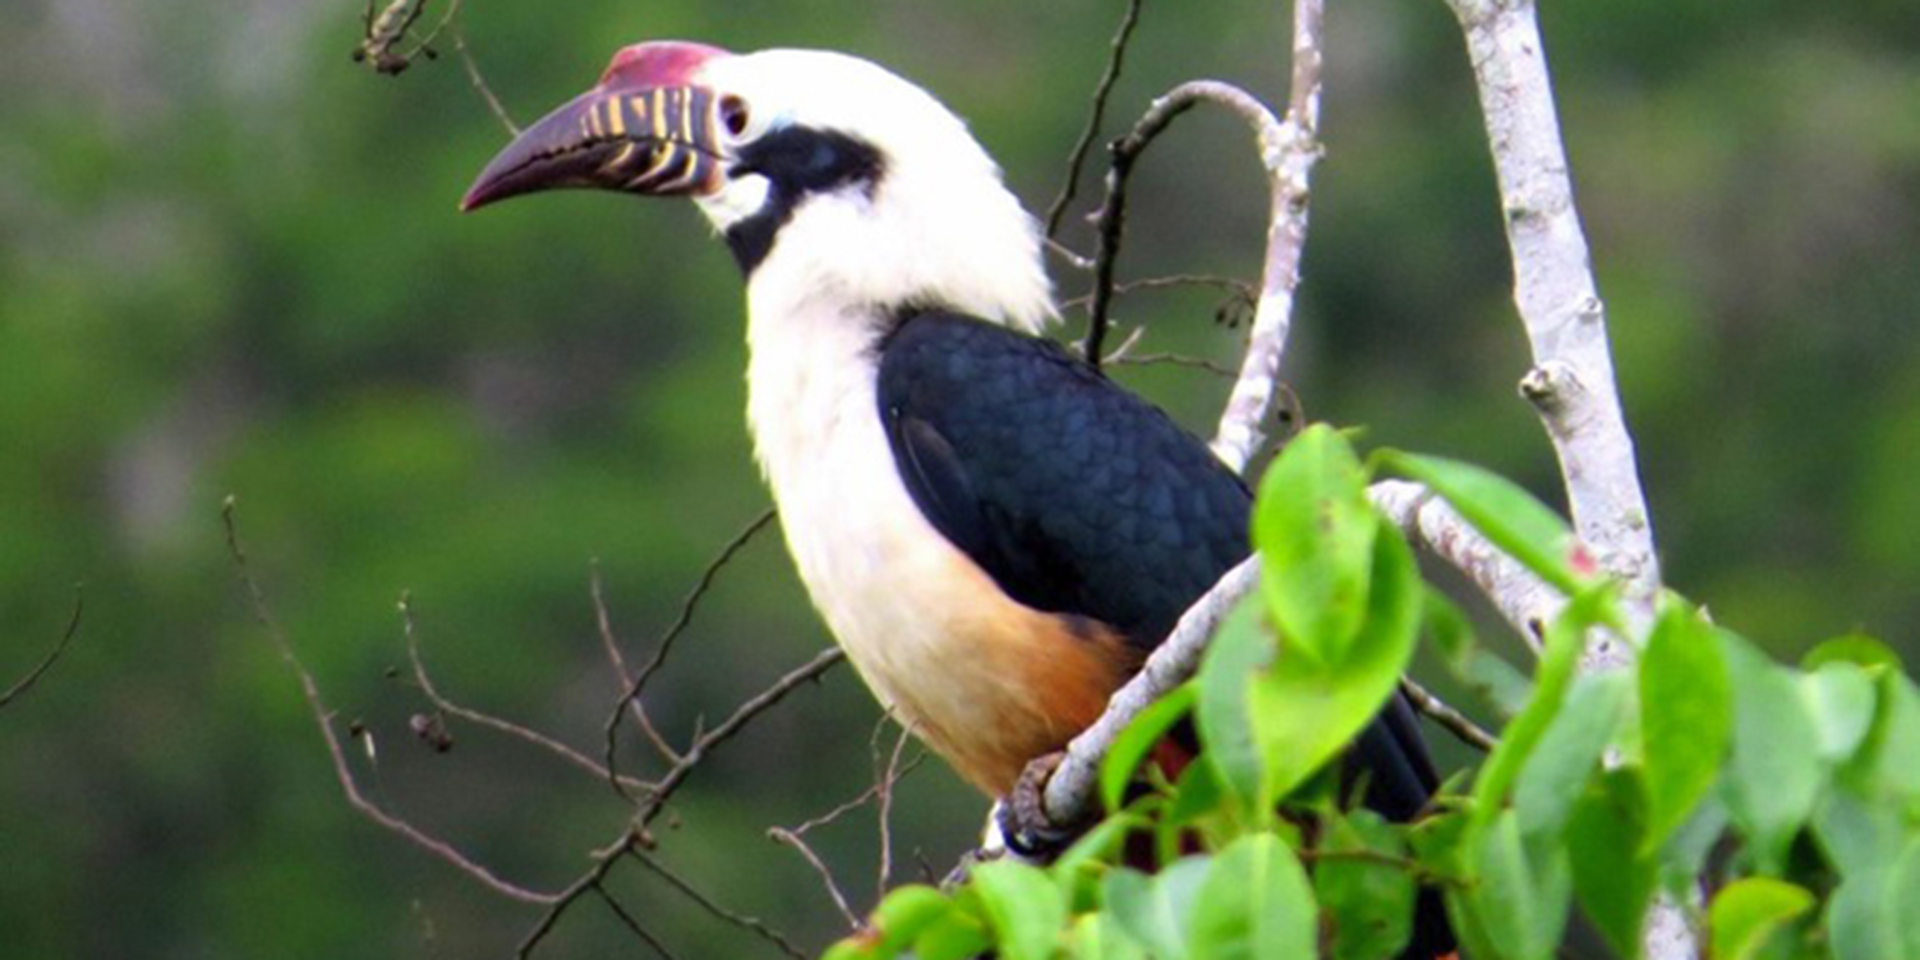 Image of a black and white bird with a large, curved, purplish beak with yellow stripes perched on a tree branch.